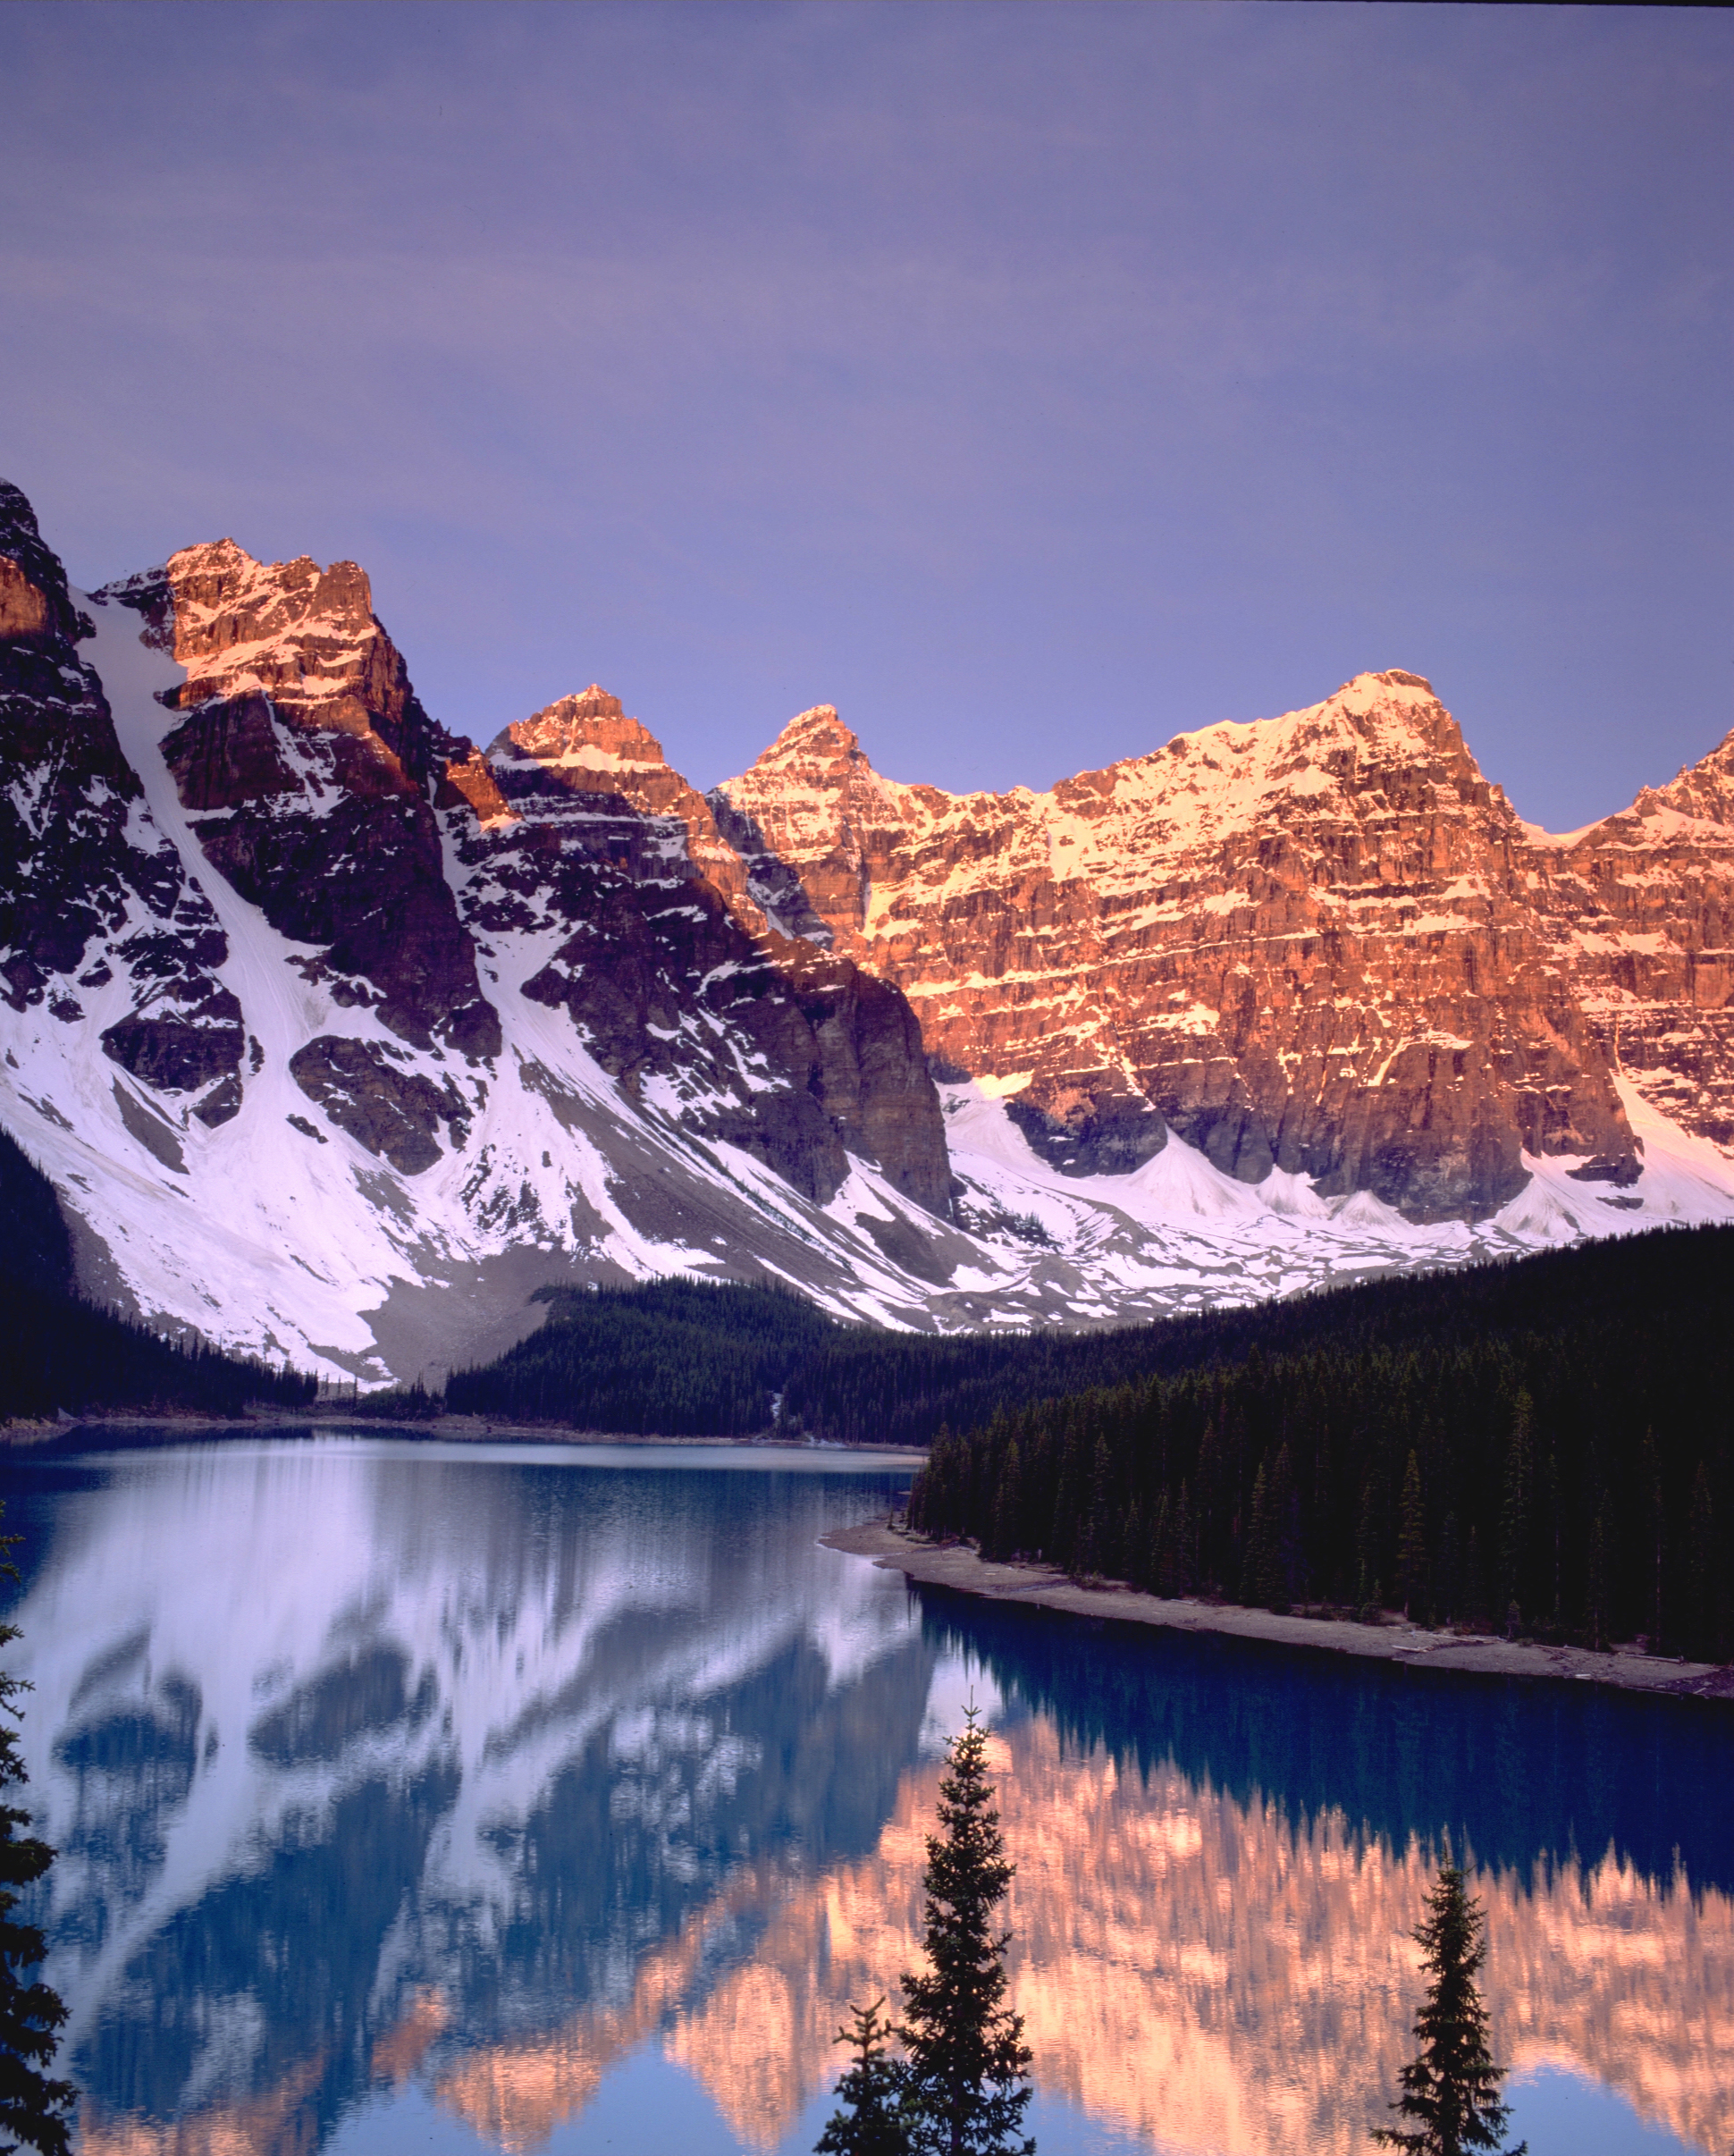 Sunrise at Moraine Lake, in the Valley of the Ten Peaks. Photo courtesy Travel Alberta.